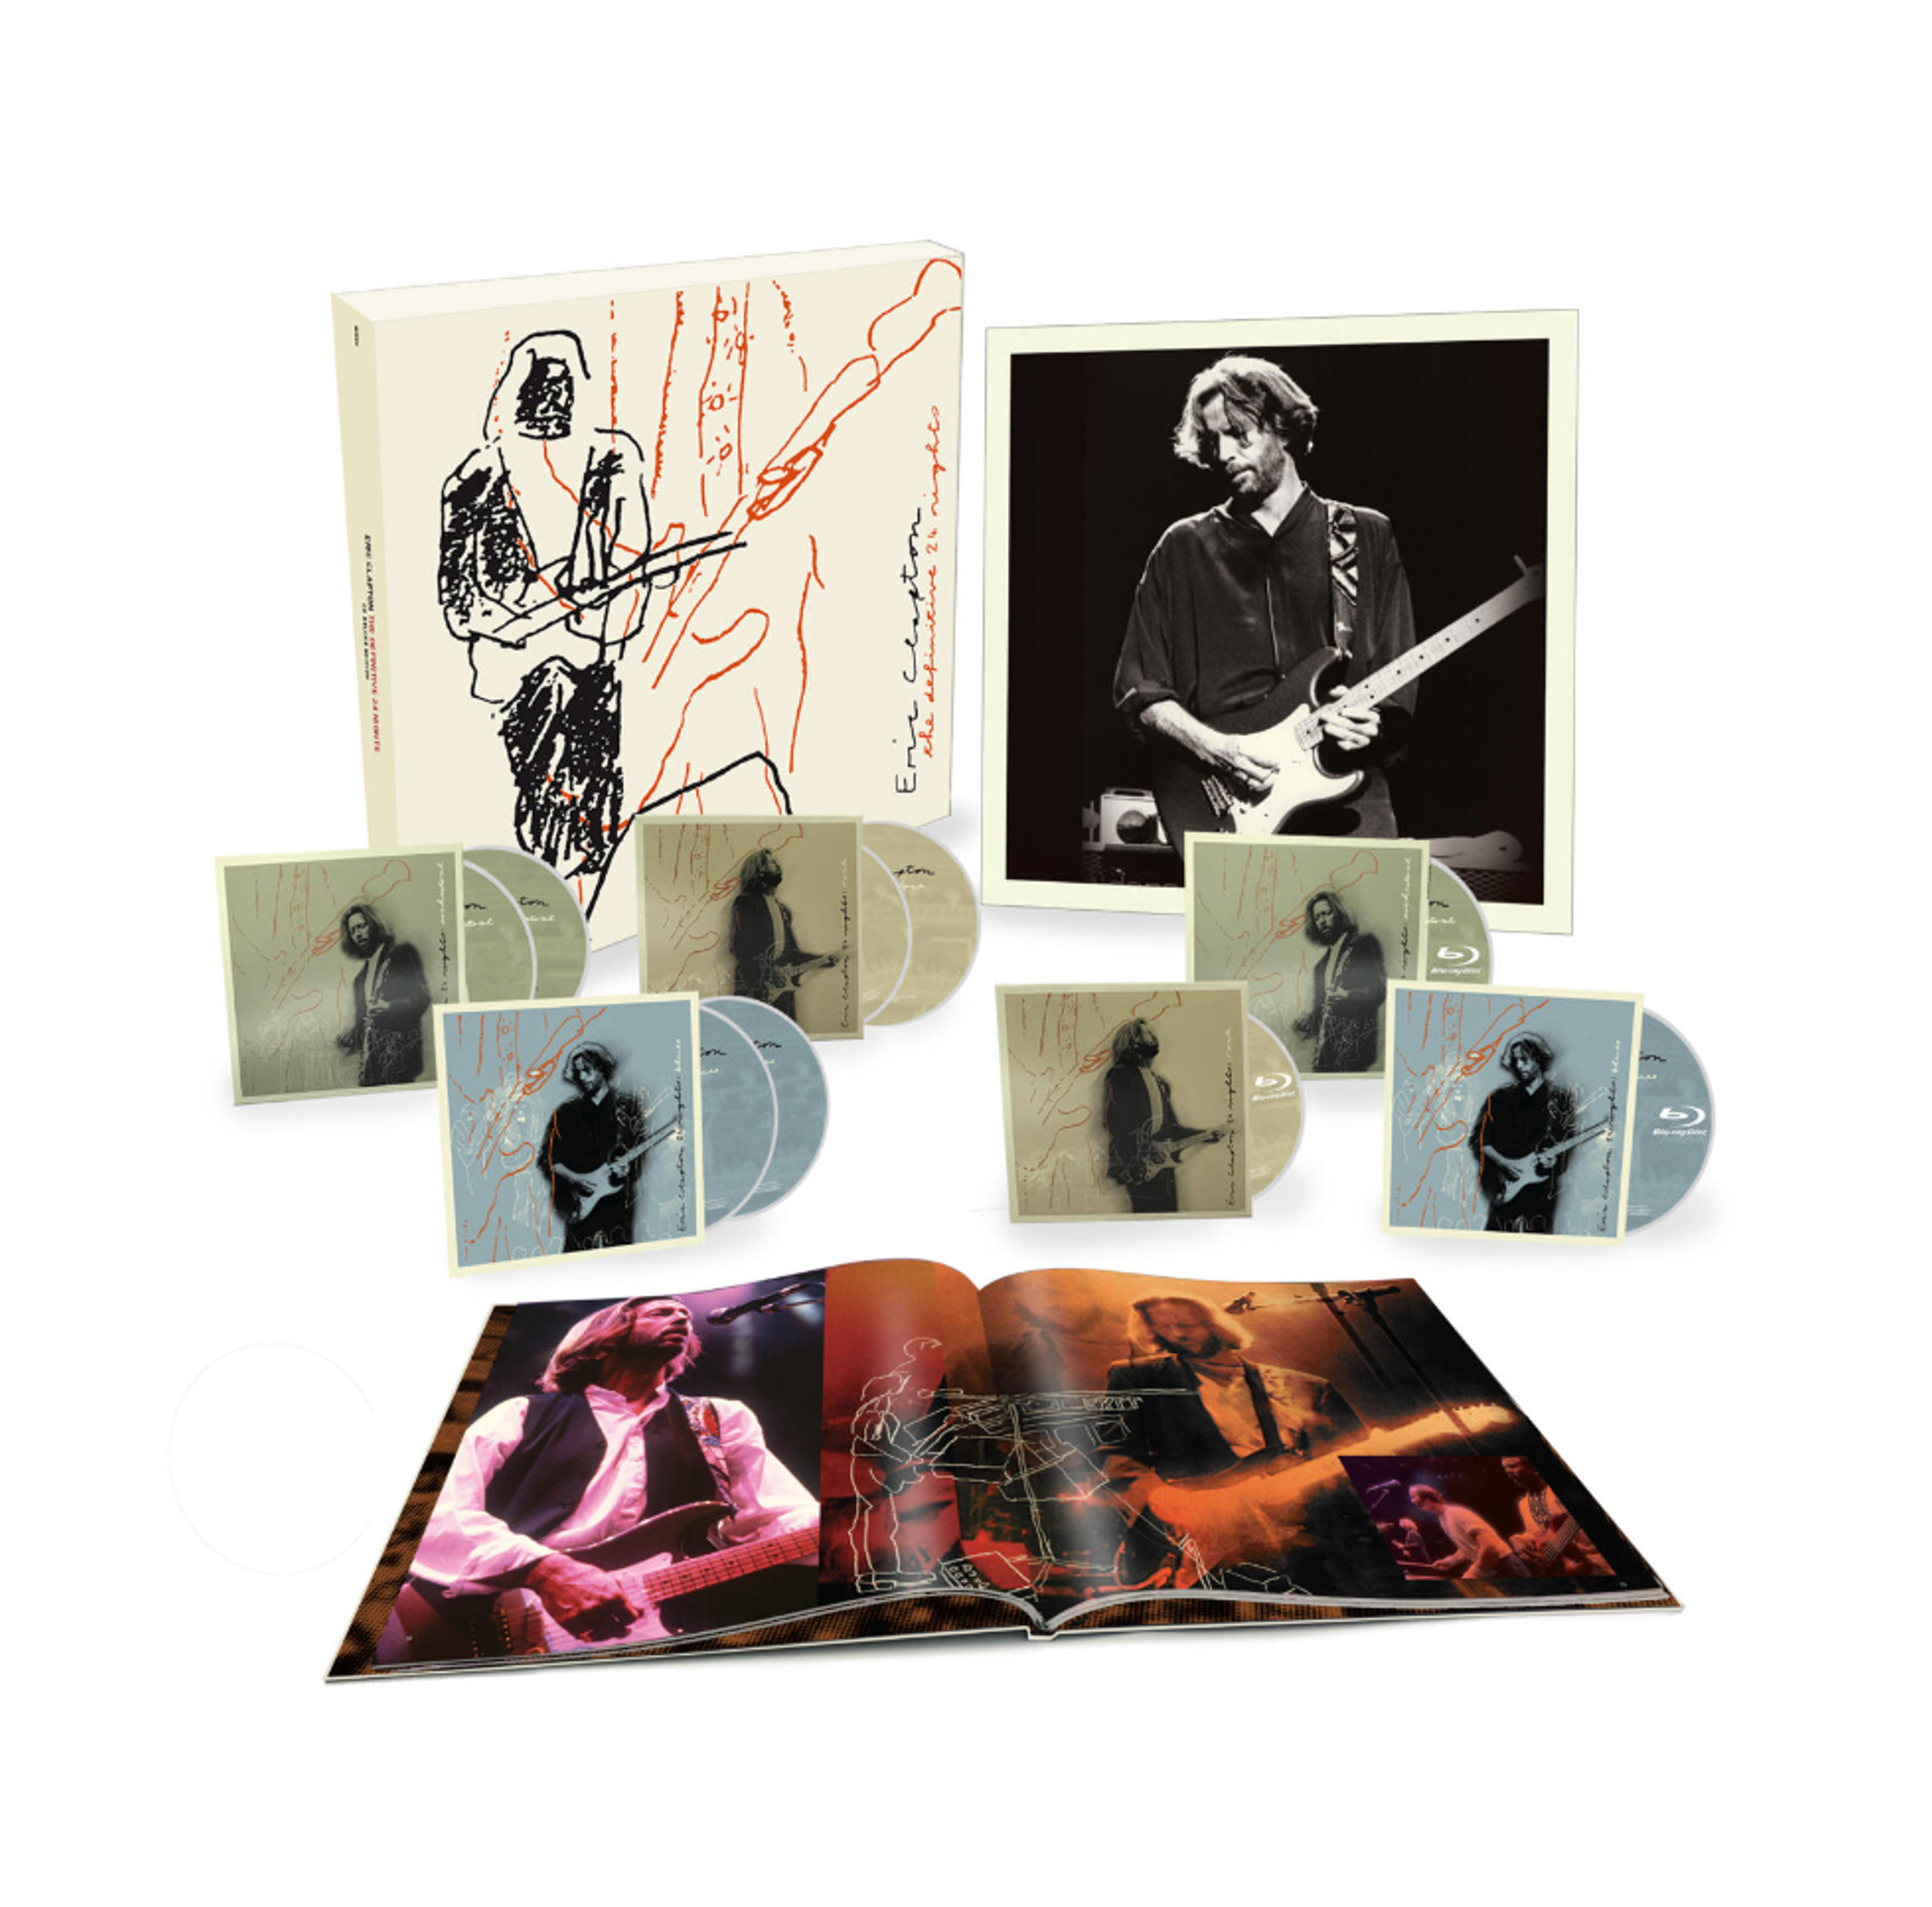 The Definitive 24 Nights (Super Deluxe CD Box)